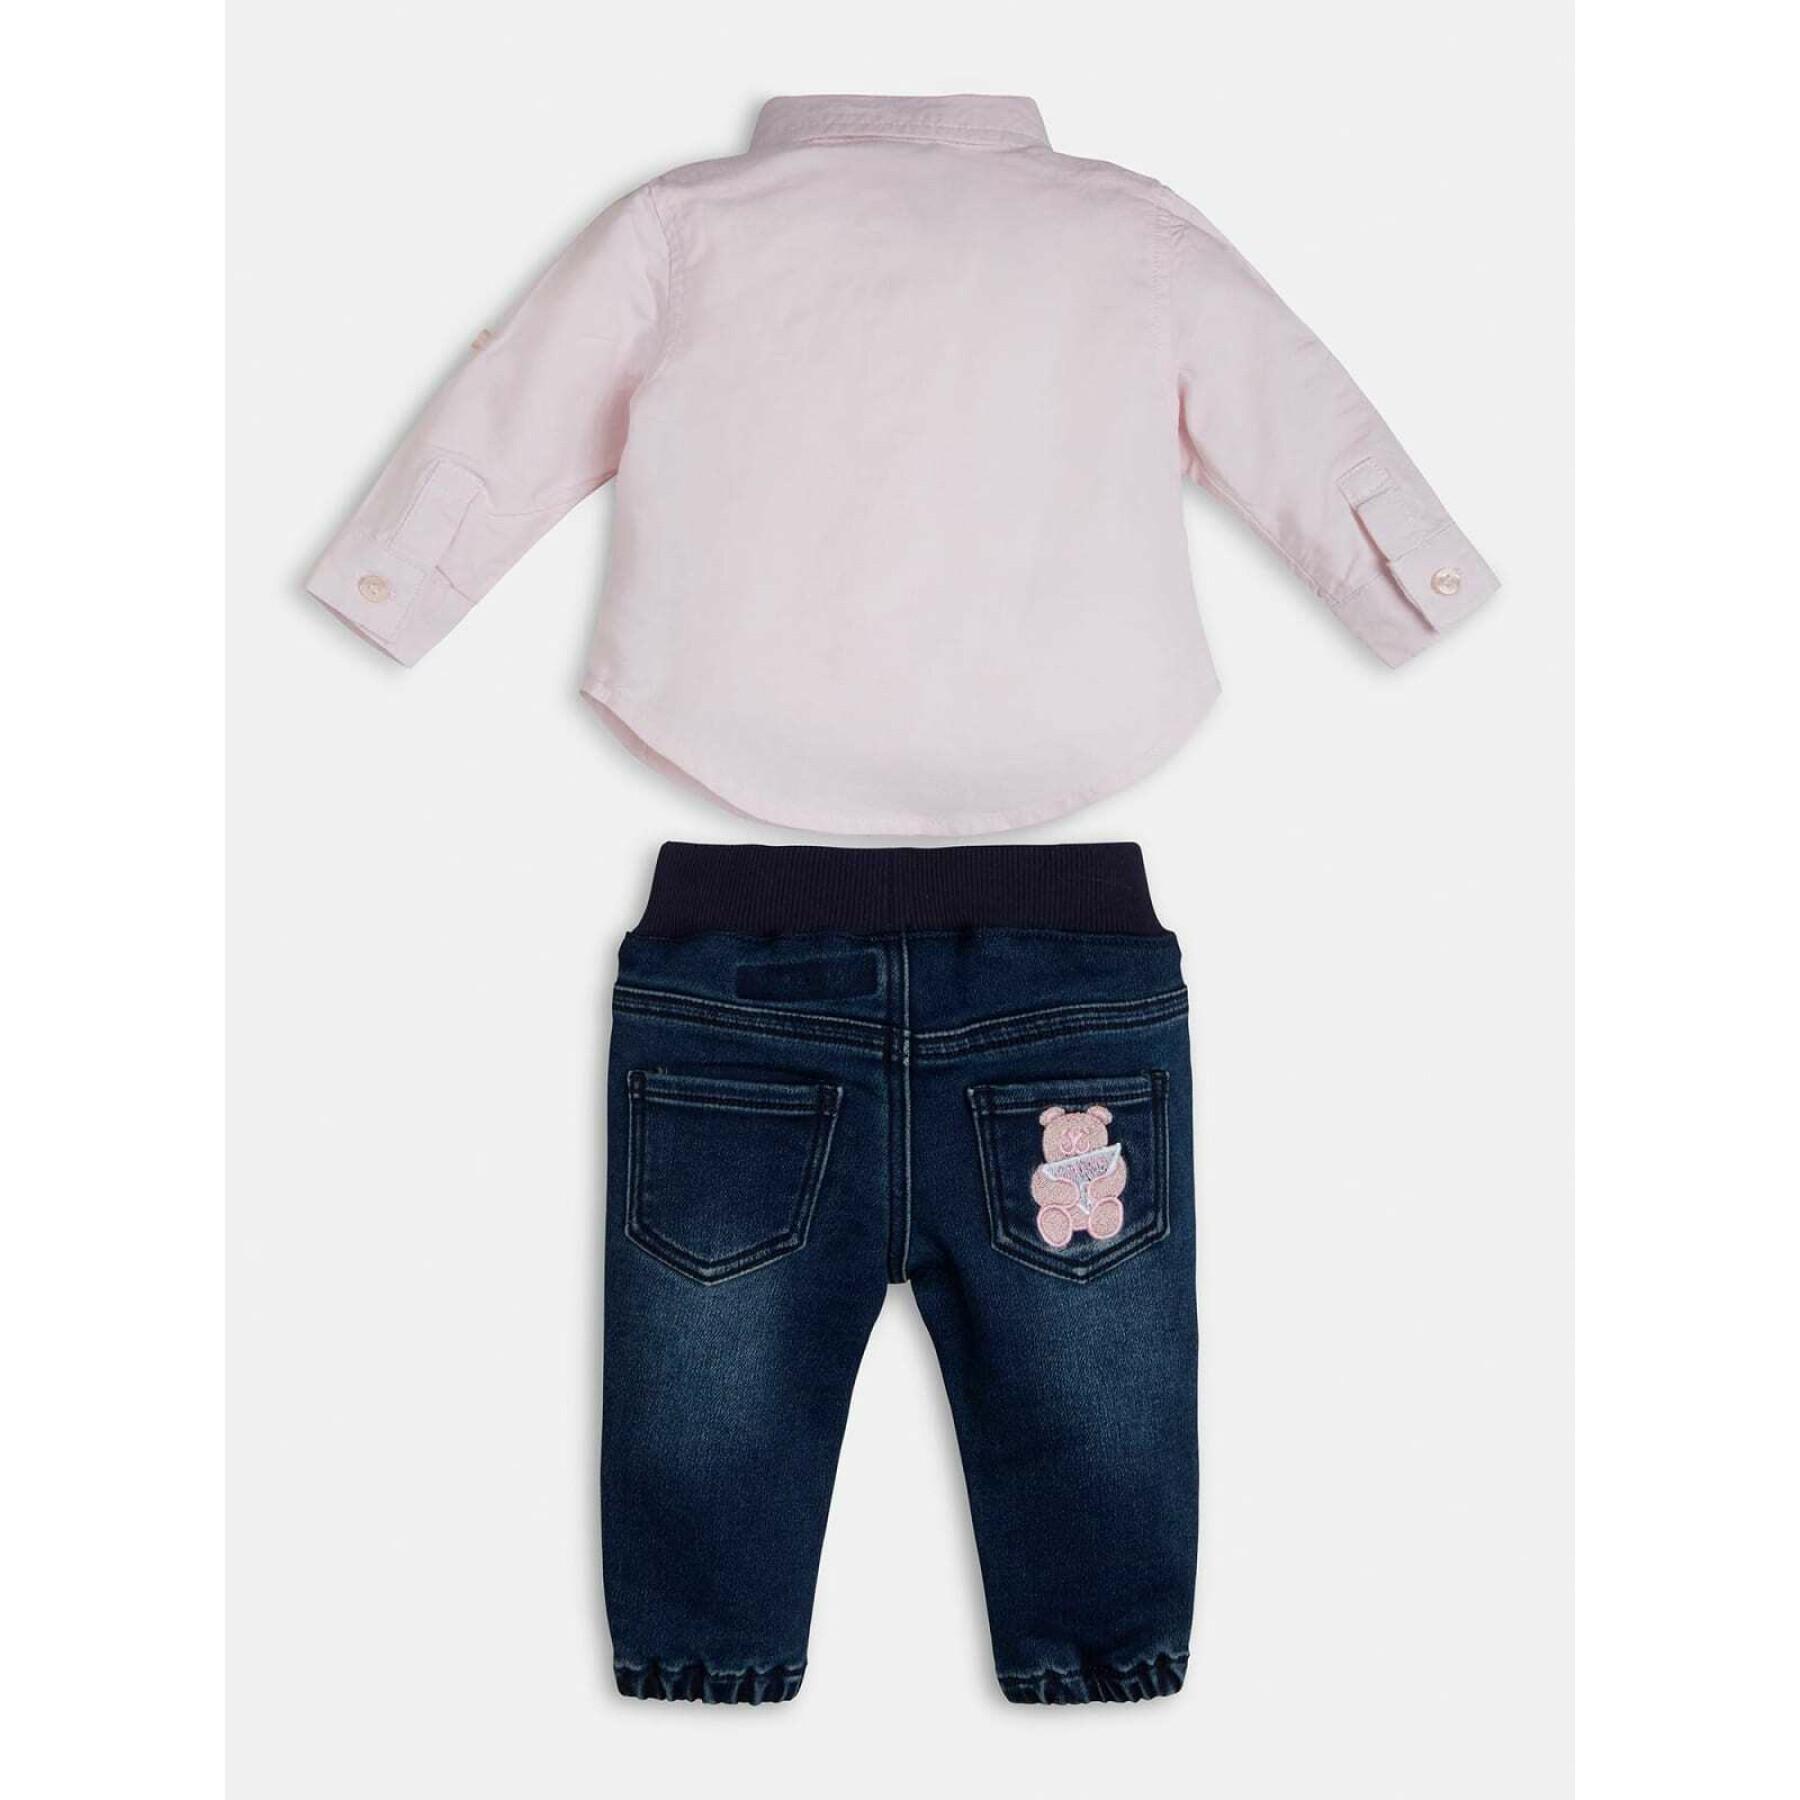 Baby shirt with adjustable sleeves + pants set Guess